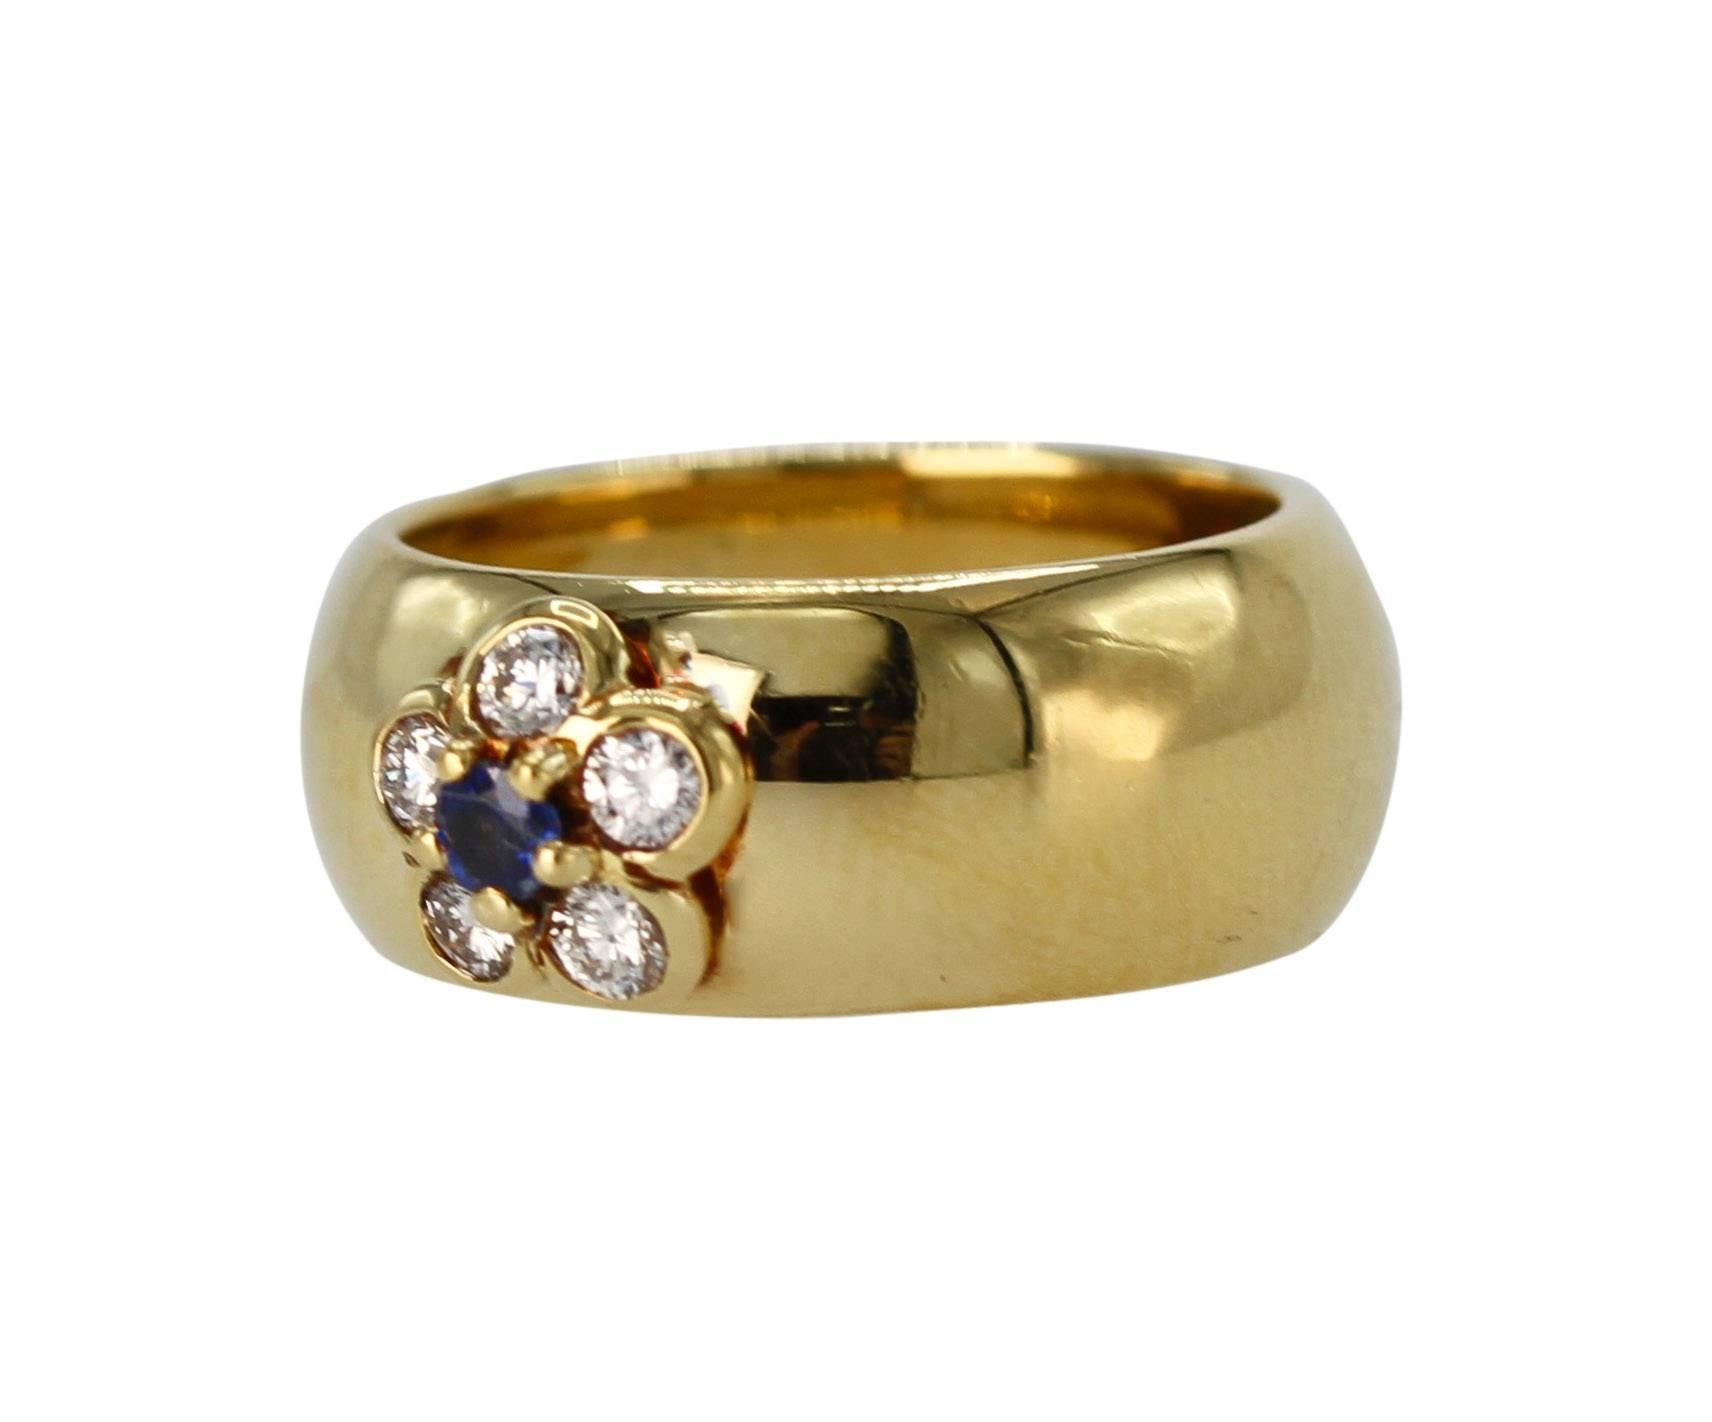 An 18 karat yellow gold, sapphire and diamond ring by Van Cleef & Arpels, France, designed as a polished gold band set at the front with a flower motif with a round sapphire weighing approximately 0.10 carat, and 5 round diamonds weighing